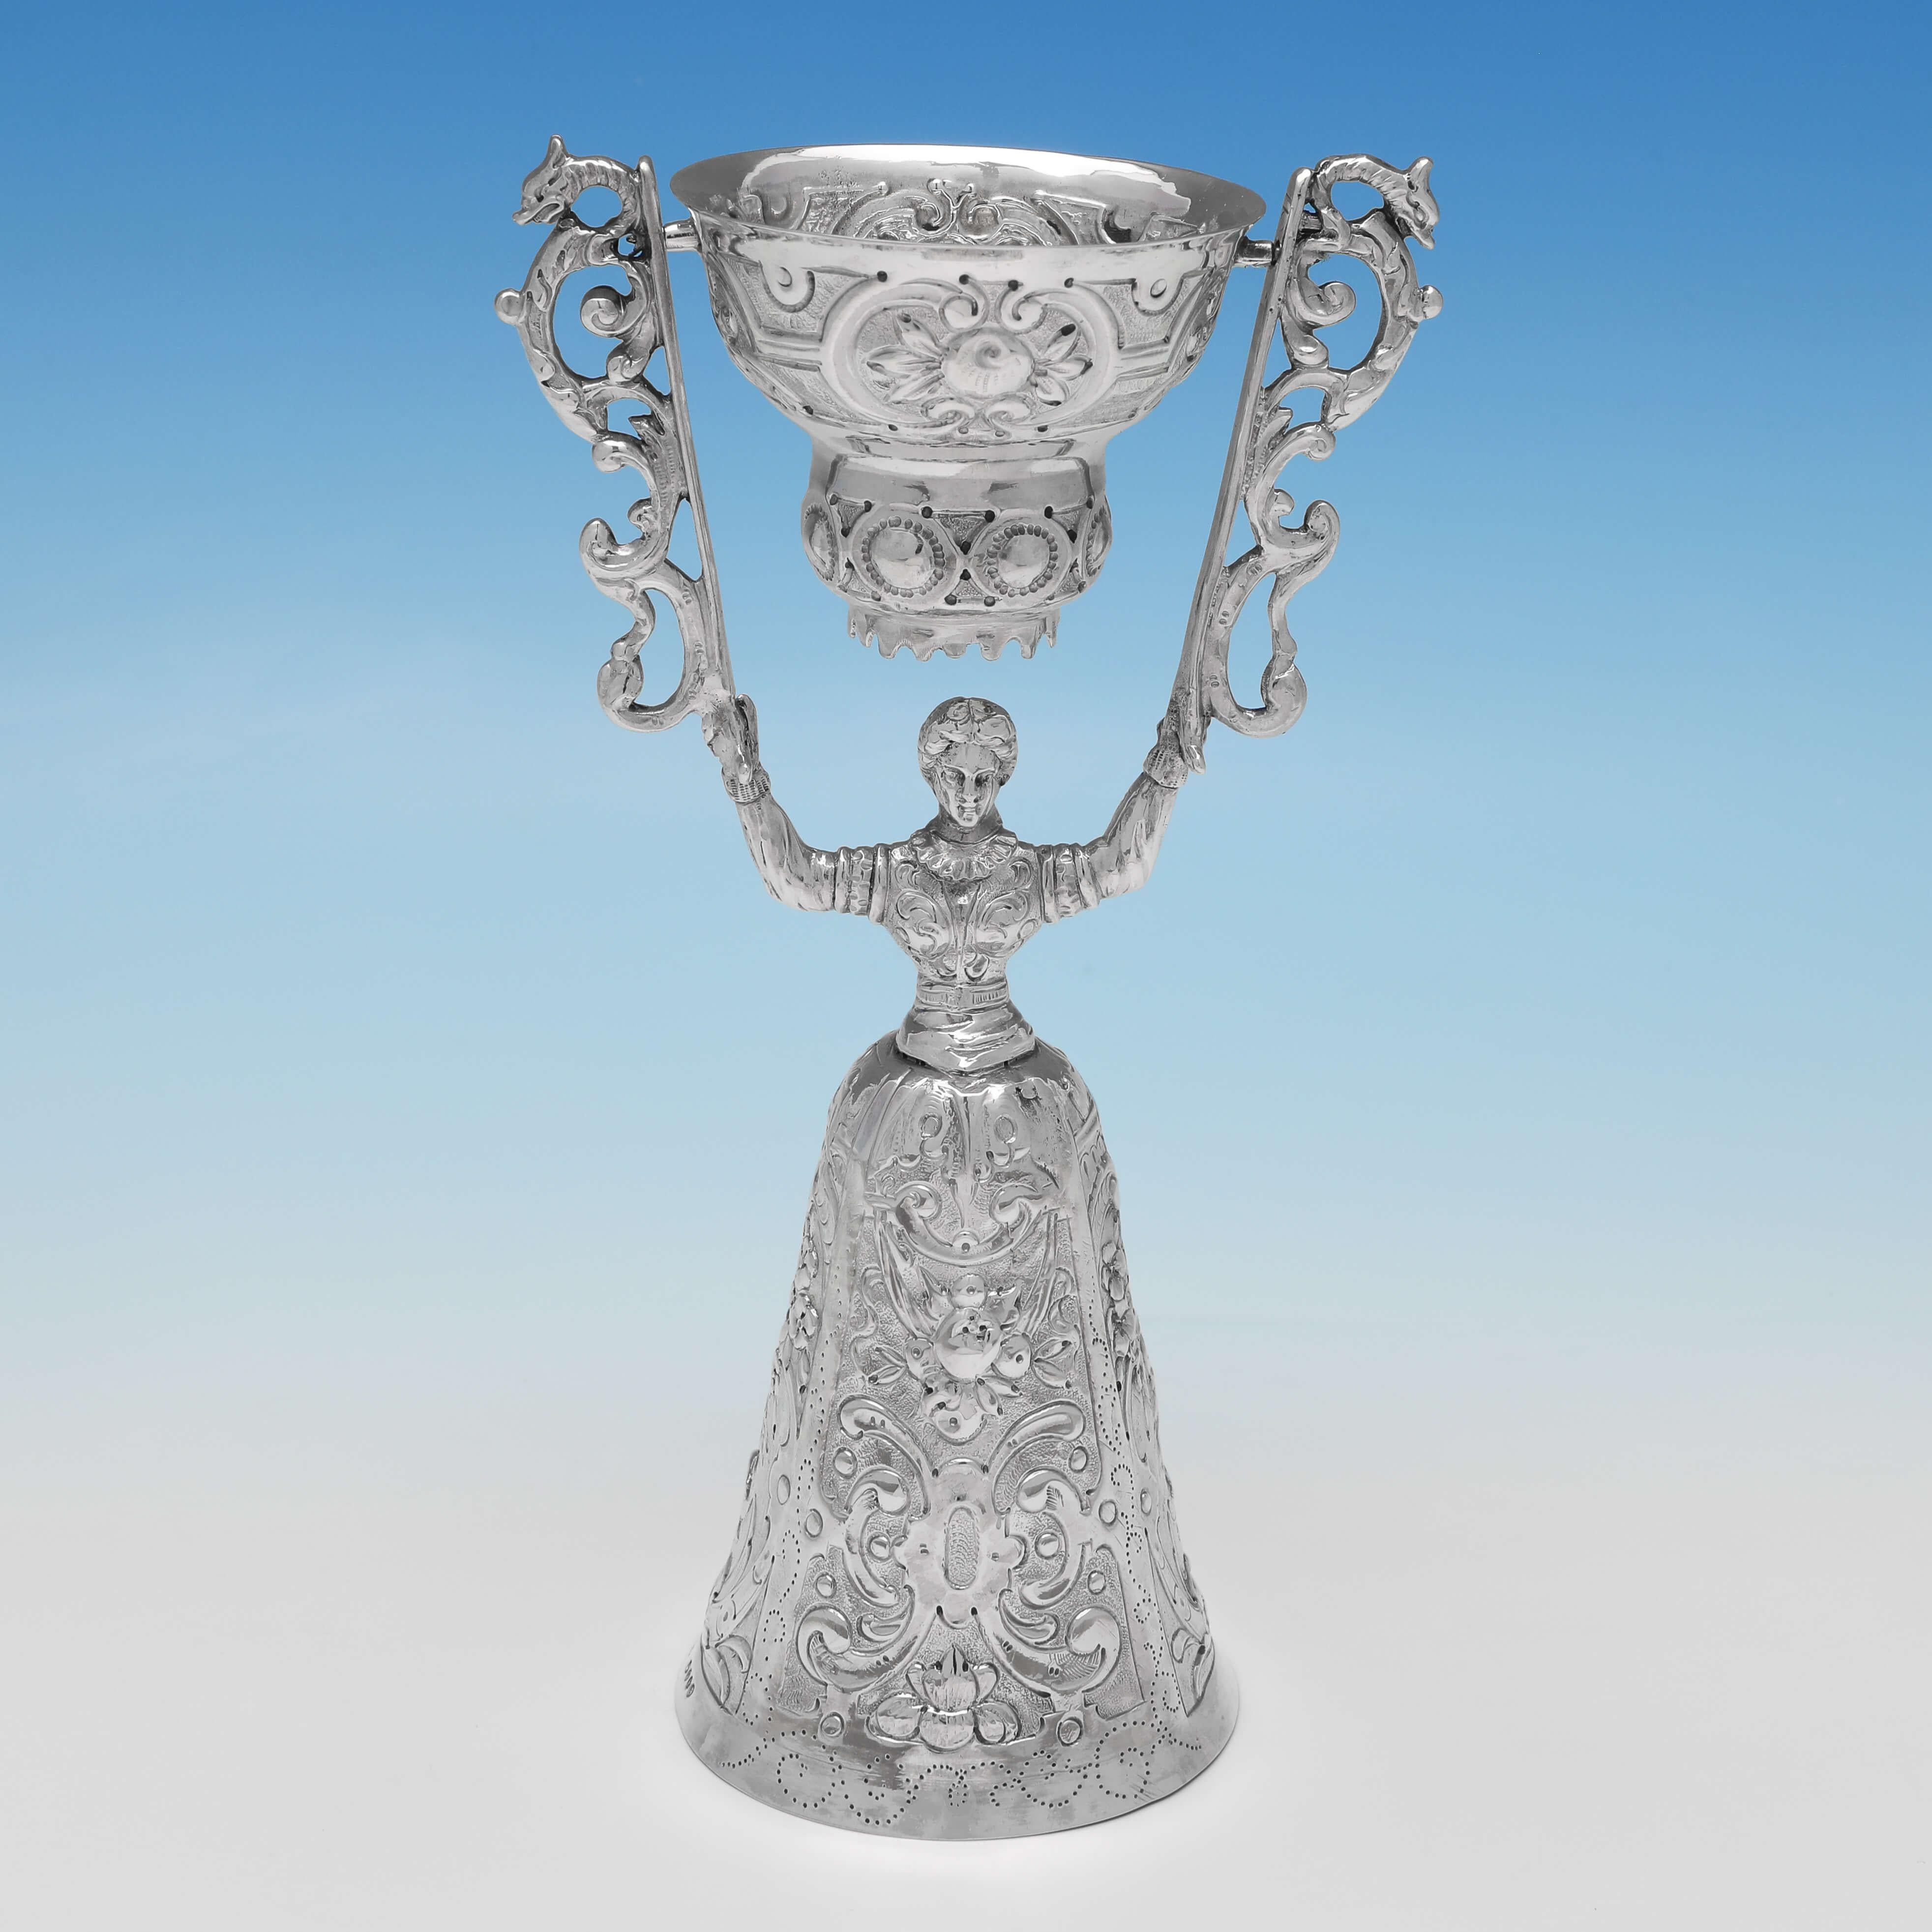 Carrying import marks for London in 1891 by Martin Sugar, this striking pair of antique sterling silver wager cups, are modelled as a gentleman and a lady in costume, and feature chased decoration throughout. Each wager cup measures 7